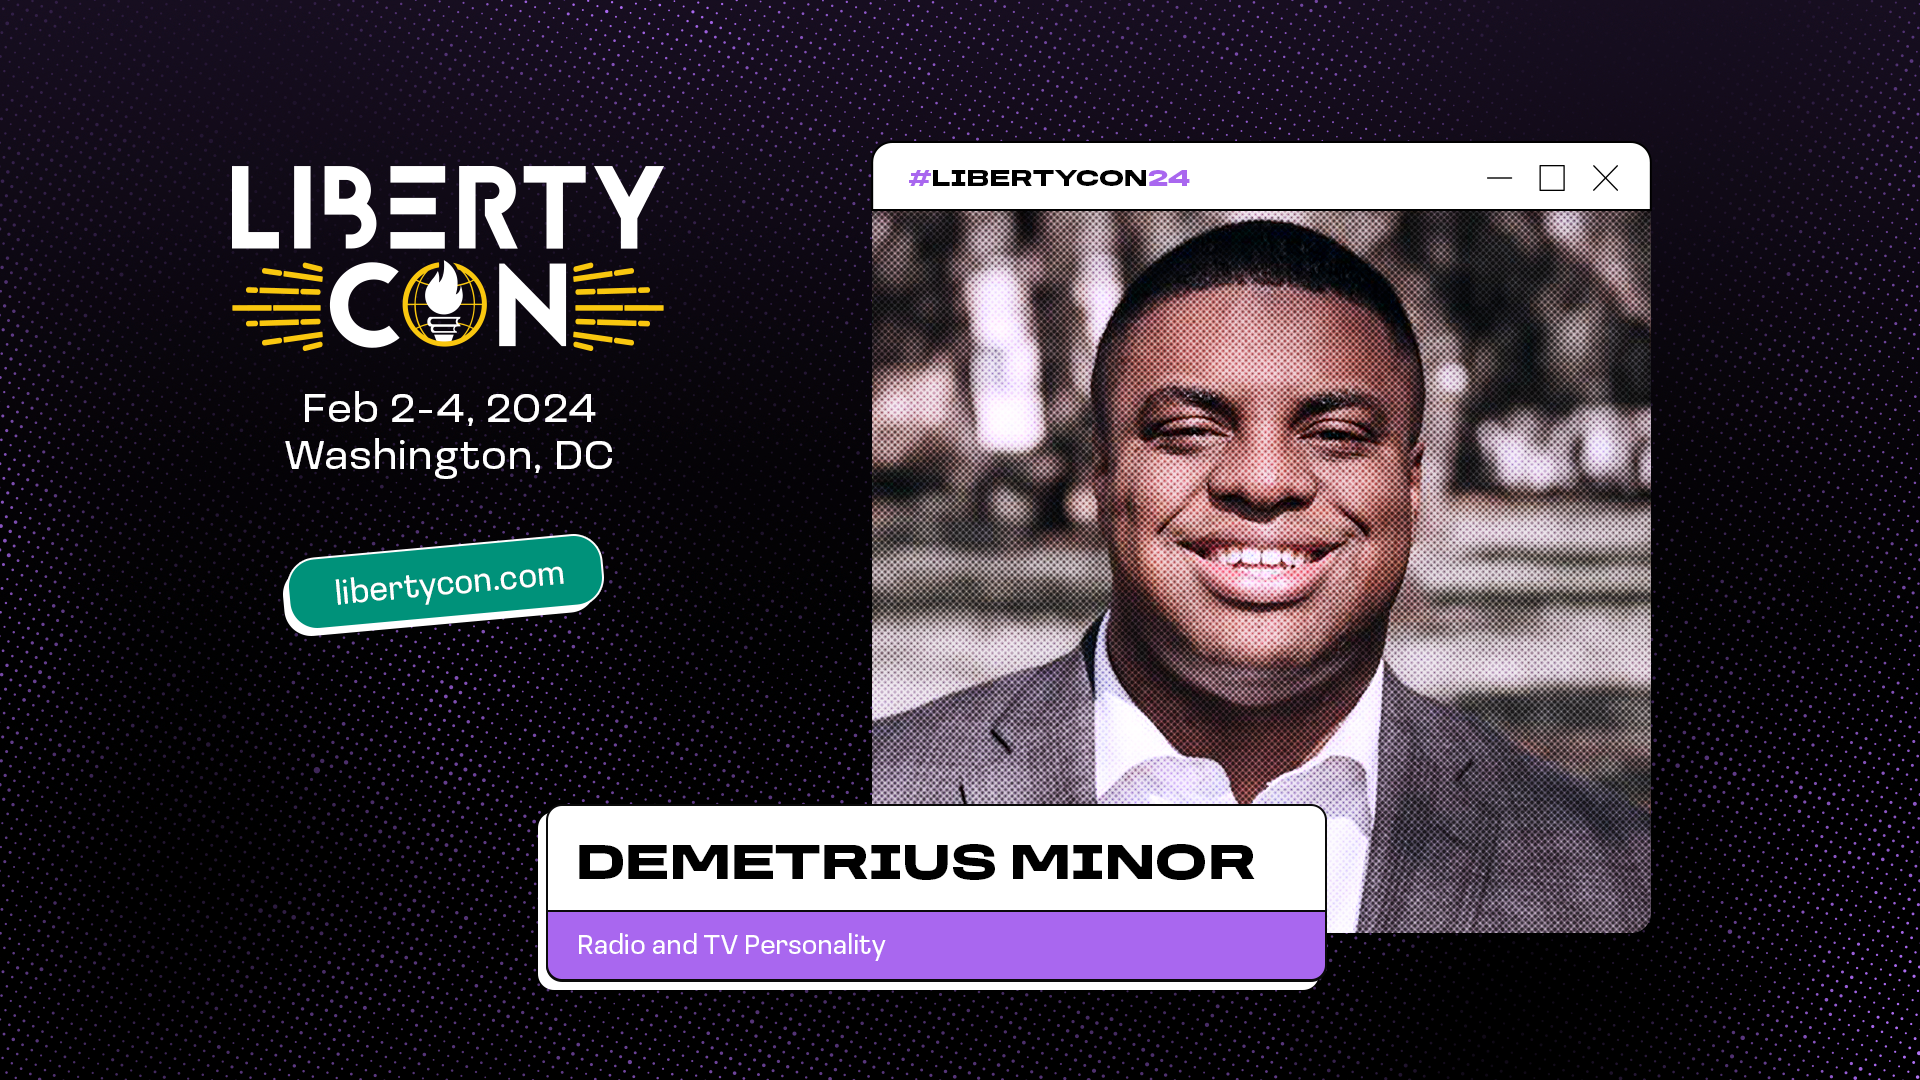 Students For Liberty is delighted to announce two new speakers for LibertyCon International 2024: Warren Rhea and Demetrius Minor